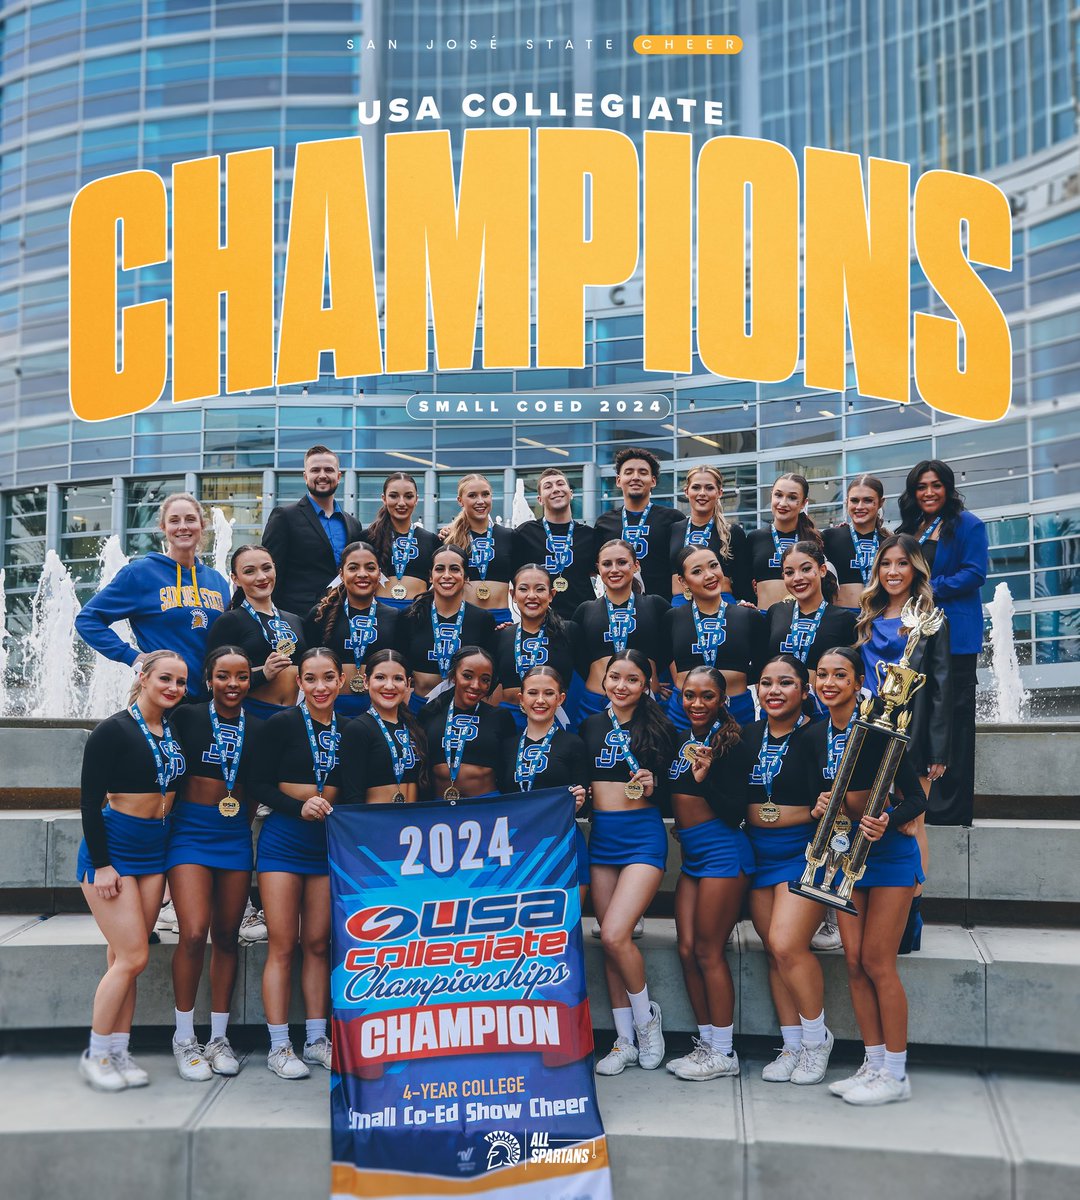 Another one! Congrats @SJSUcheer on winning its second-straight national championship 🏆 #AllSpartans